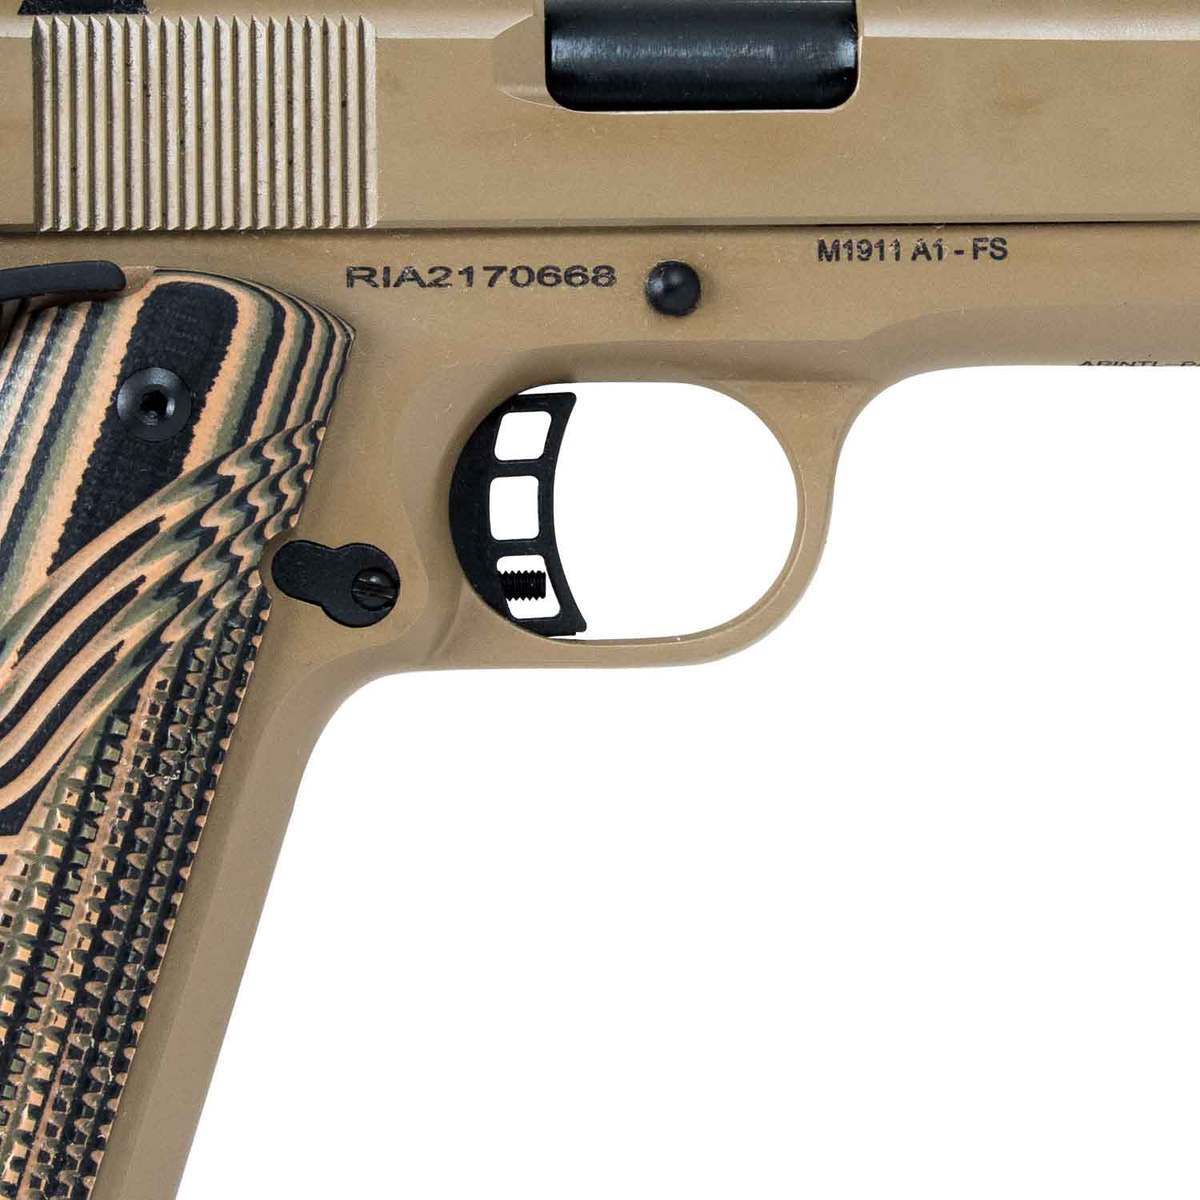 Rock Island M1911 A1 Fs Tactical 45 Auto Acp 5in Camoblack Pistol 81 Rounds Tan 4496